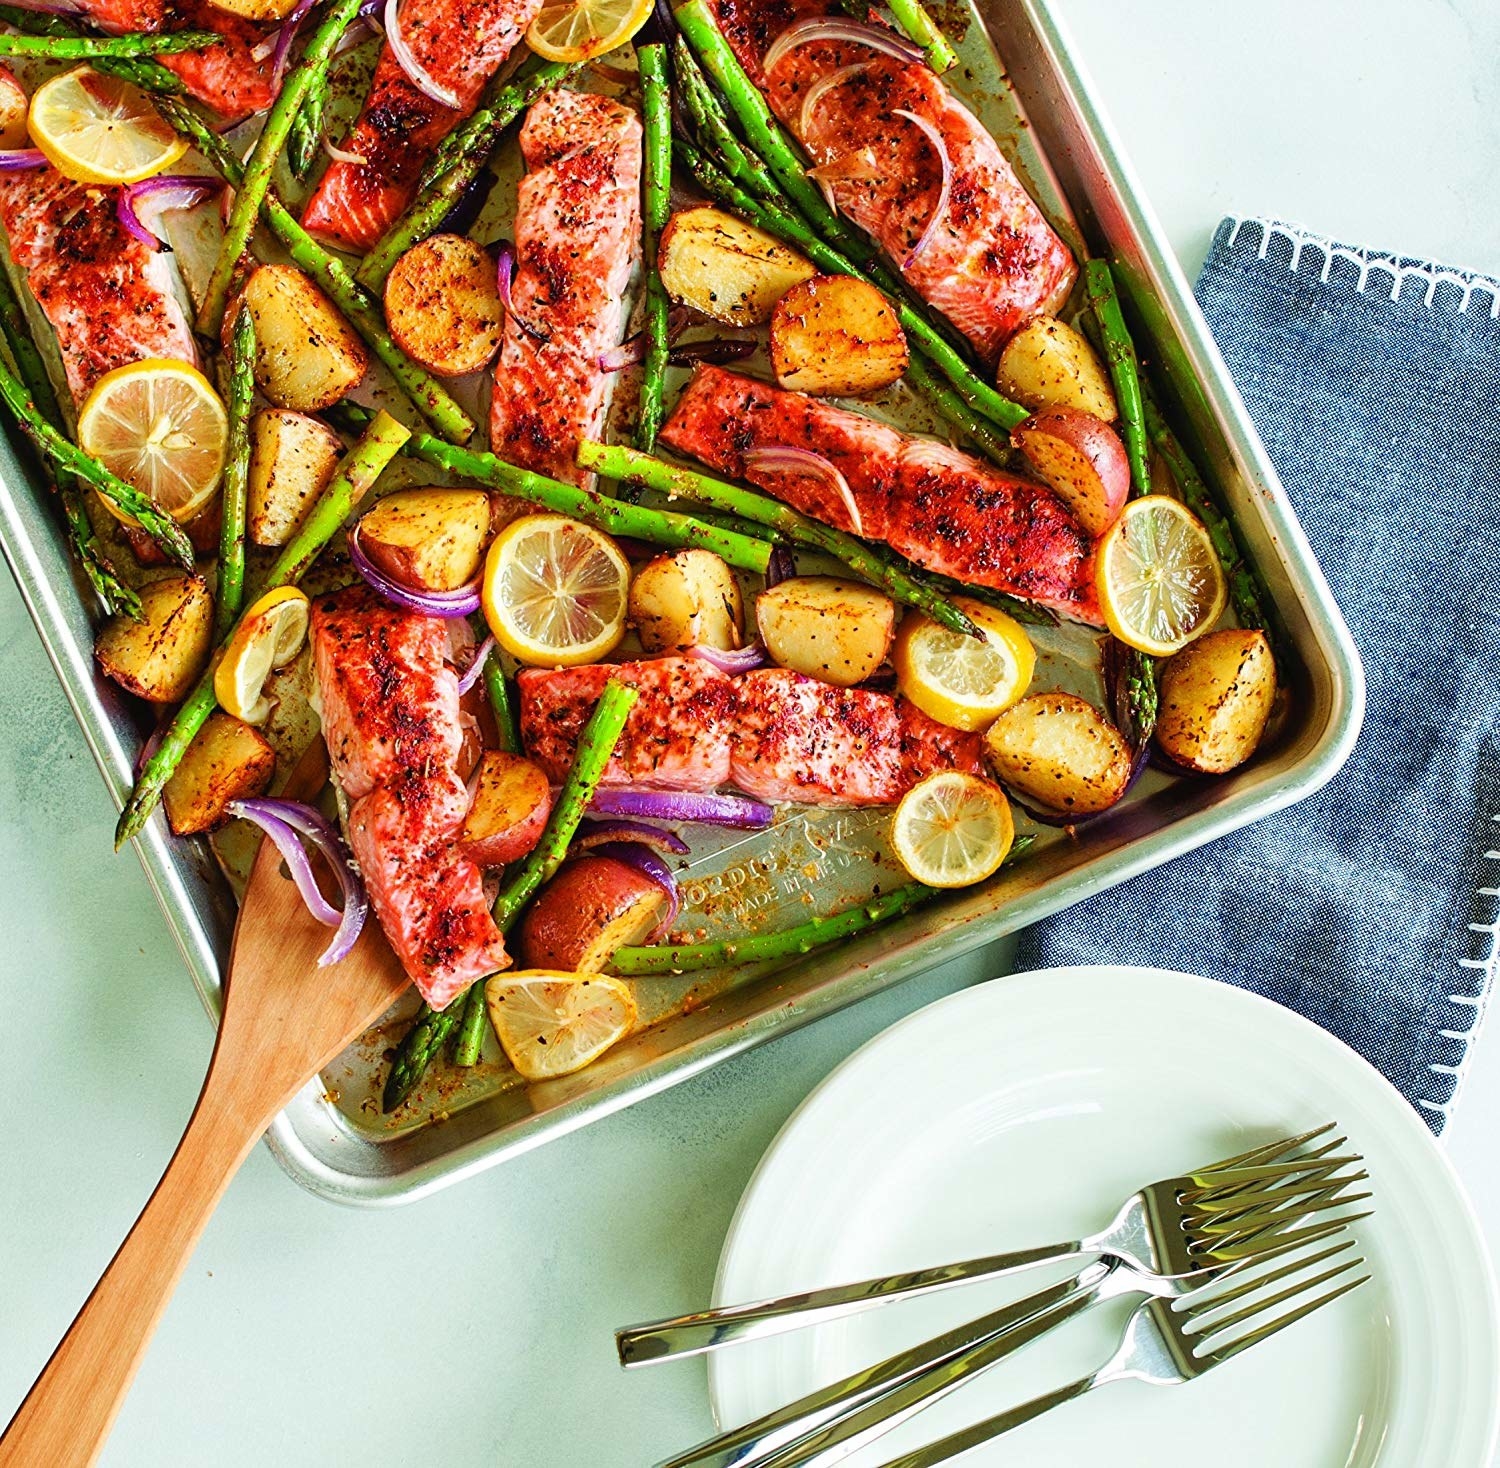 A sheet pan with salmon, potatoes, lemon slices, and asparagus on it